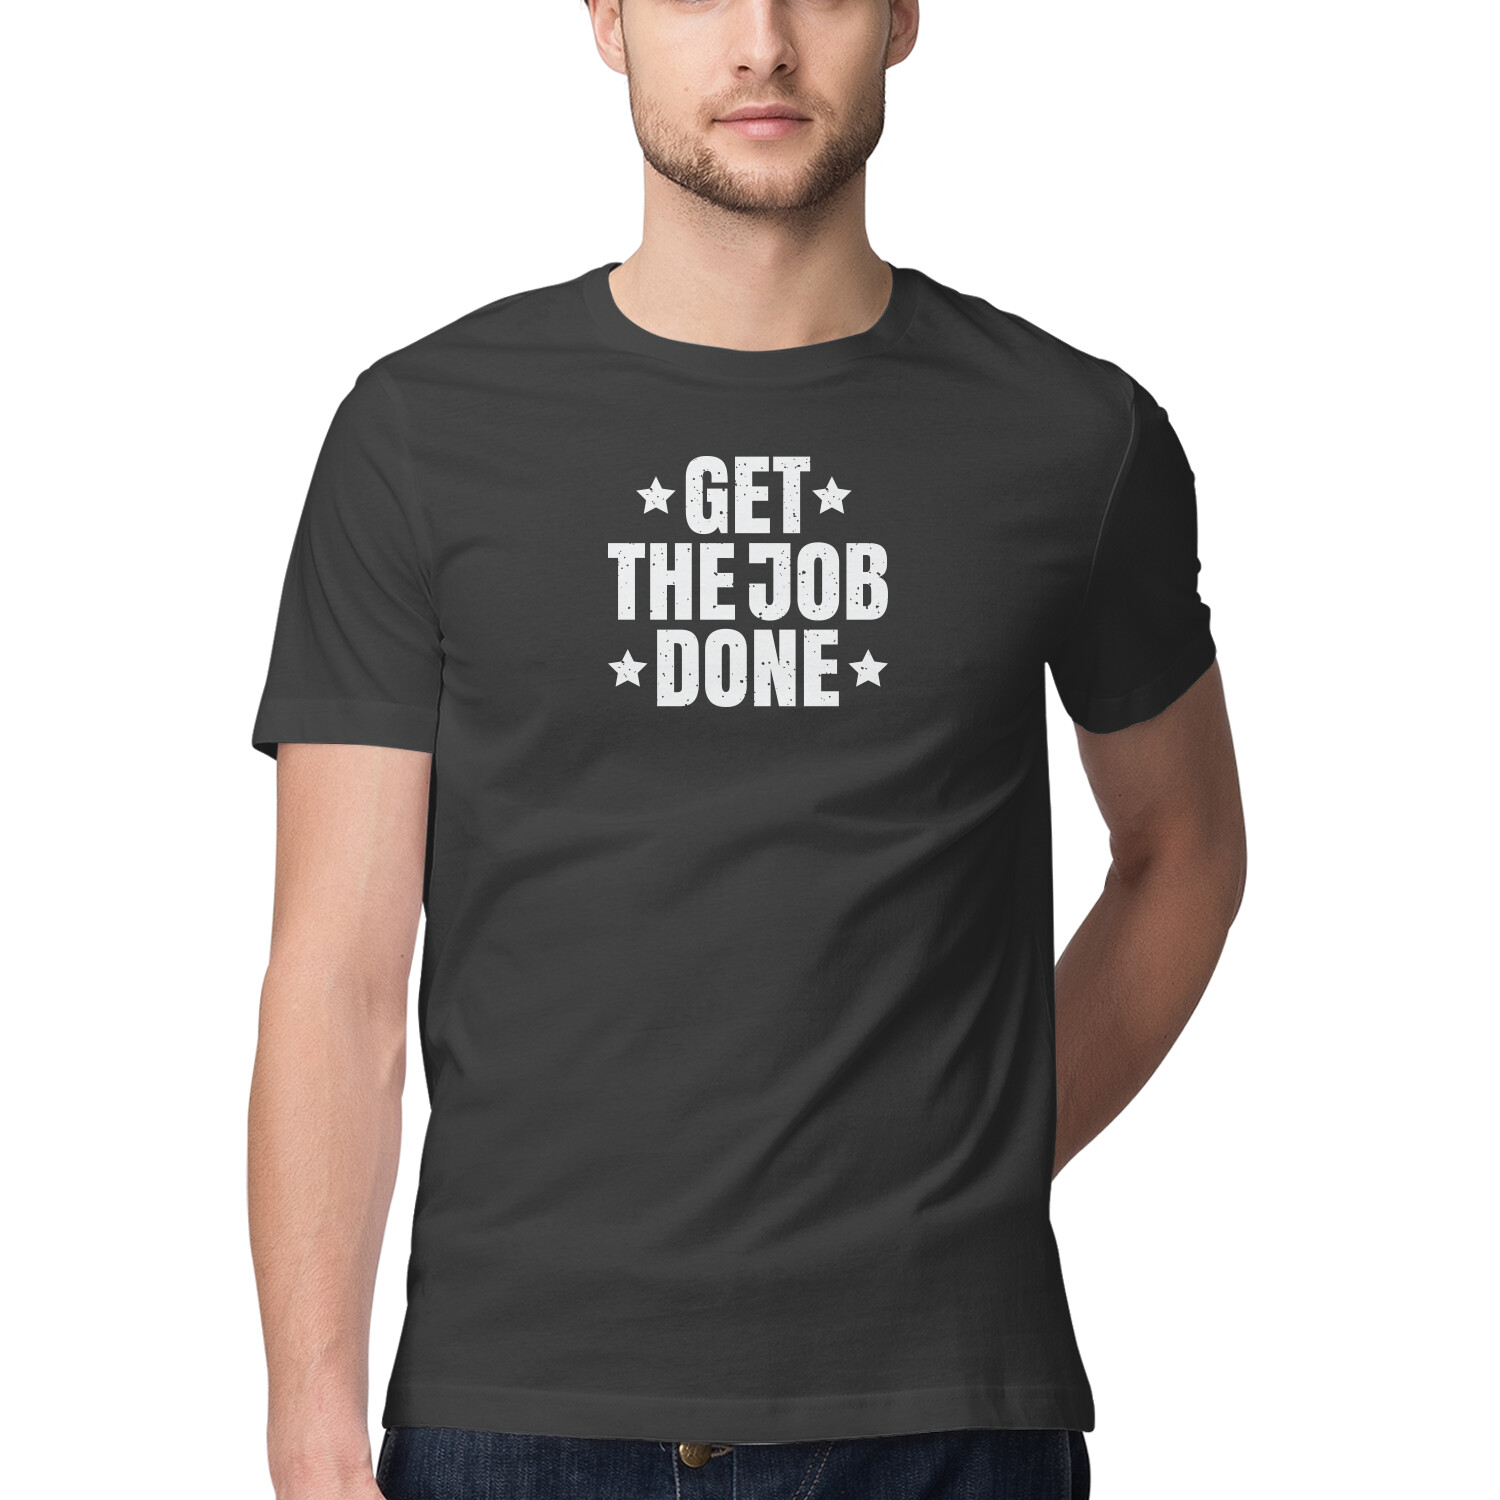 get the job done, Funny T-shirt quotes and sayings